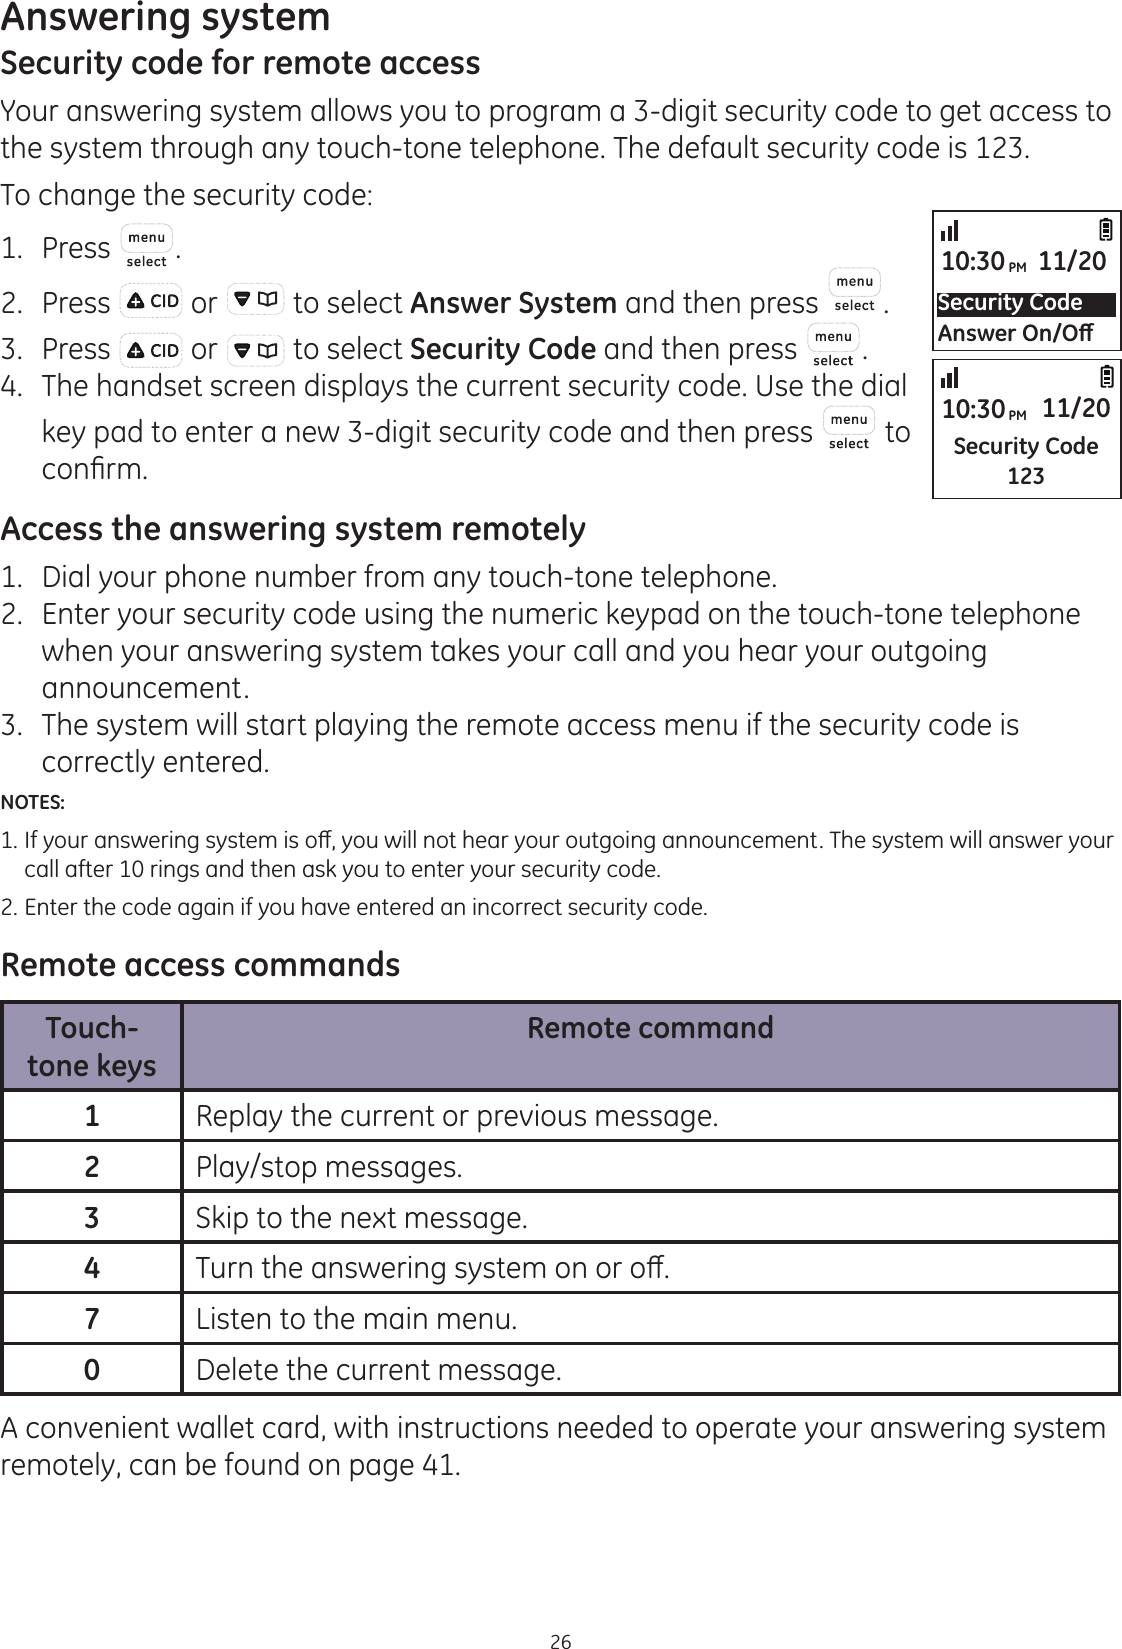 Answering system26Security code for remote accessYour answering system allows you to program a 3-digit security code to get access to the system through any touch-tone telephone. The default security code is 123. To change the security code:1.  Press .2.  Press   or   to select Answer System and then press  . 3.  Press   or   to select Security Code and then press  . 4.  The handset screen displays the current security code. Use the dial key pad to enter a new 3-digit security code and then press   to FRQ¿UPAccess the answering system remotely1.   Dial your phone number from any touch-tone telephone.2.   Enter your security code using the numeric keypad on the touch-tone telephone when your answering system takes your call and you hear your outgoing announcement.3.   The system will start playing the remote access menu if the security code is correctly entered. NOTES: ,I\RXUDQVZHULQJV\VWHPLVRȺ\RXZLOOQRWKHDU\RXURXWJRLQJDQQRXQFHPHQW7KHV\VWHPZLOODQVZHU\RXU  call after 10 rings and then ask you to enter your security code.2. Enter the code again if you have entered an incorrect security code.Remote access commandsTouch-tone keysRemote command1Replay the current or previous message.2Play/stop messages.3Skip to the next message.47XUQWKHDQVZHULQJV\VWHPRQRURȺ7Listen to the main menu.0Delete the current message.A convenient wallet card, with instructions needed to operate your answering system remotely, can be found on page 41.Security Code$QVZHU2Q2ȹ10:30PM 11/20Security Code12310:30PM 11/20